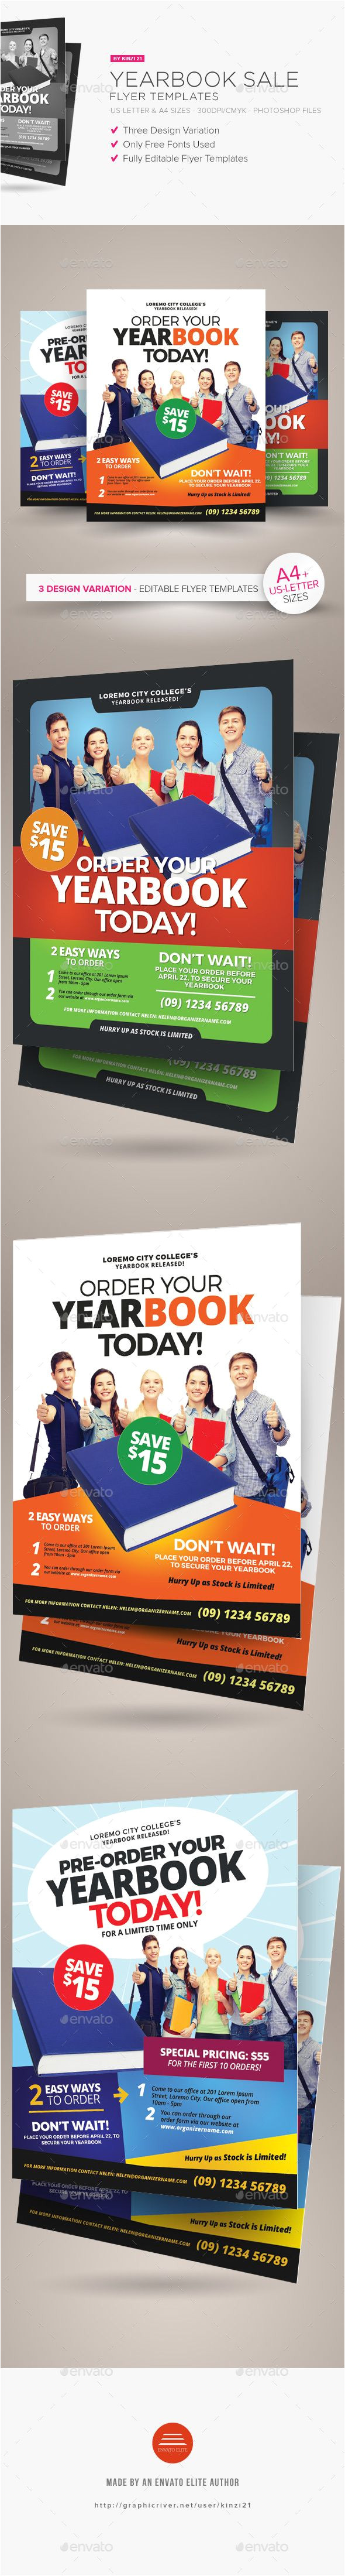 yearbook template